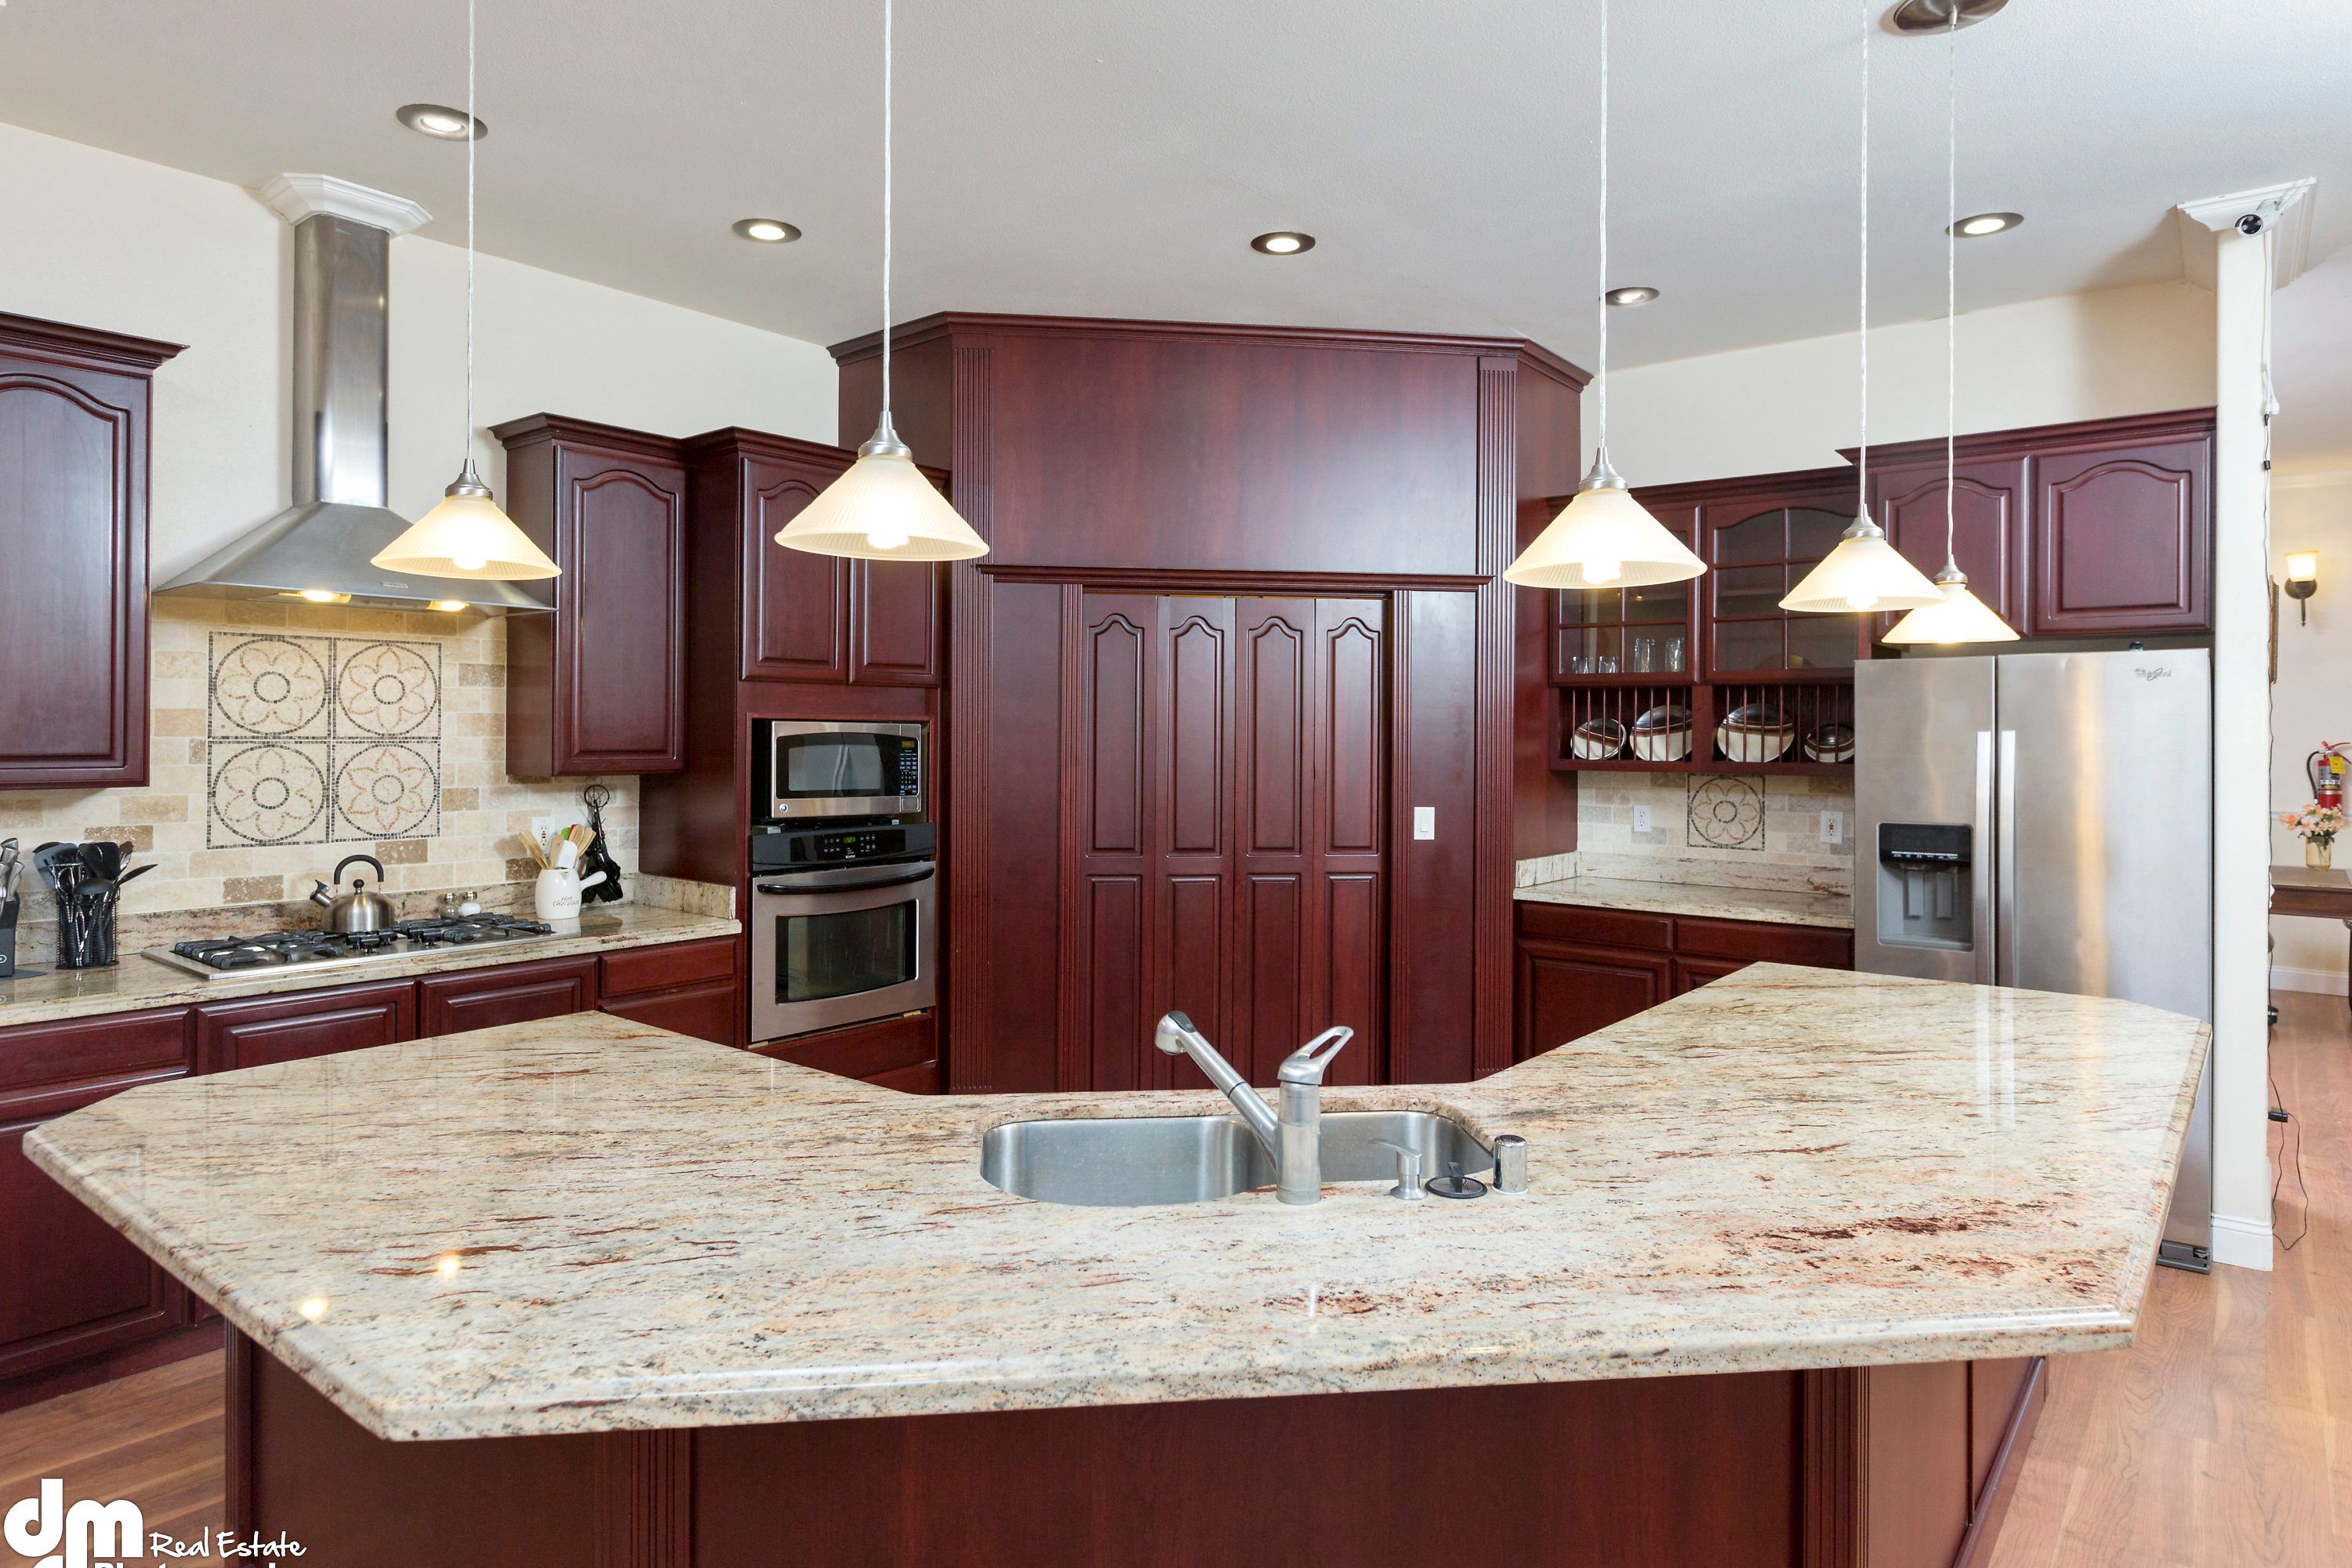 Interior view of Arctic Rose Assisted Living Home featuring a well-designed kitchen with modern appliances.